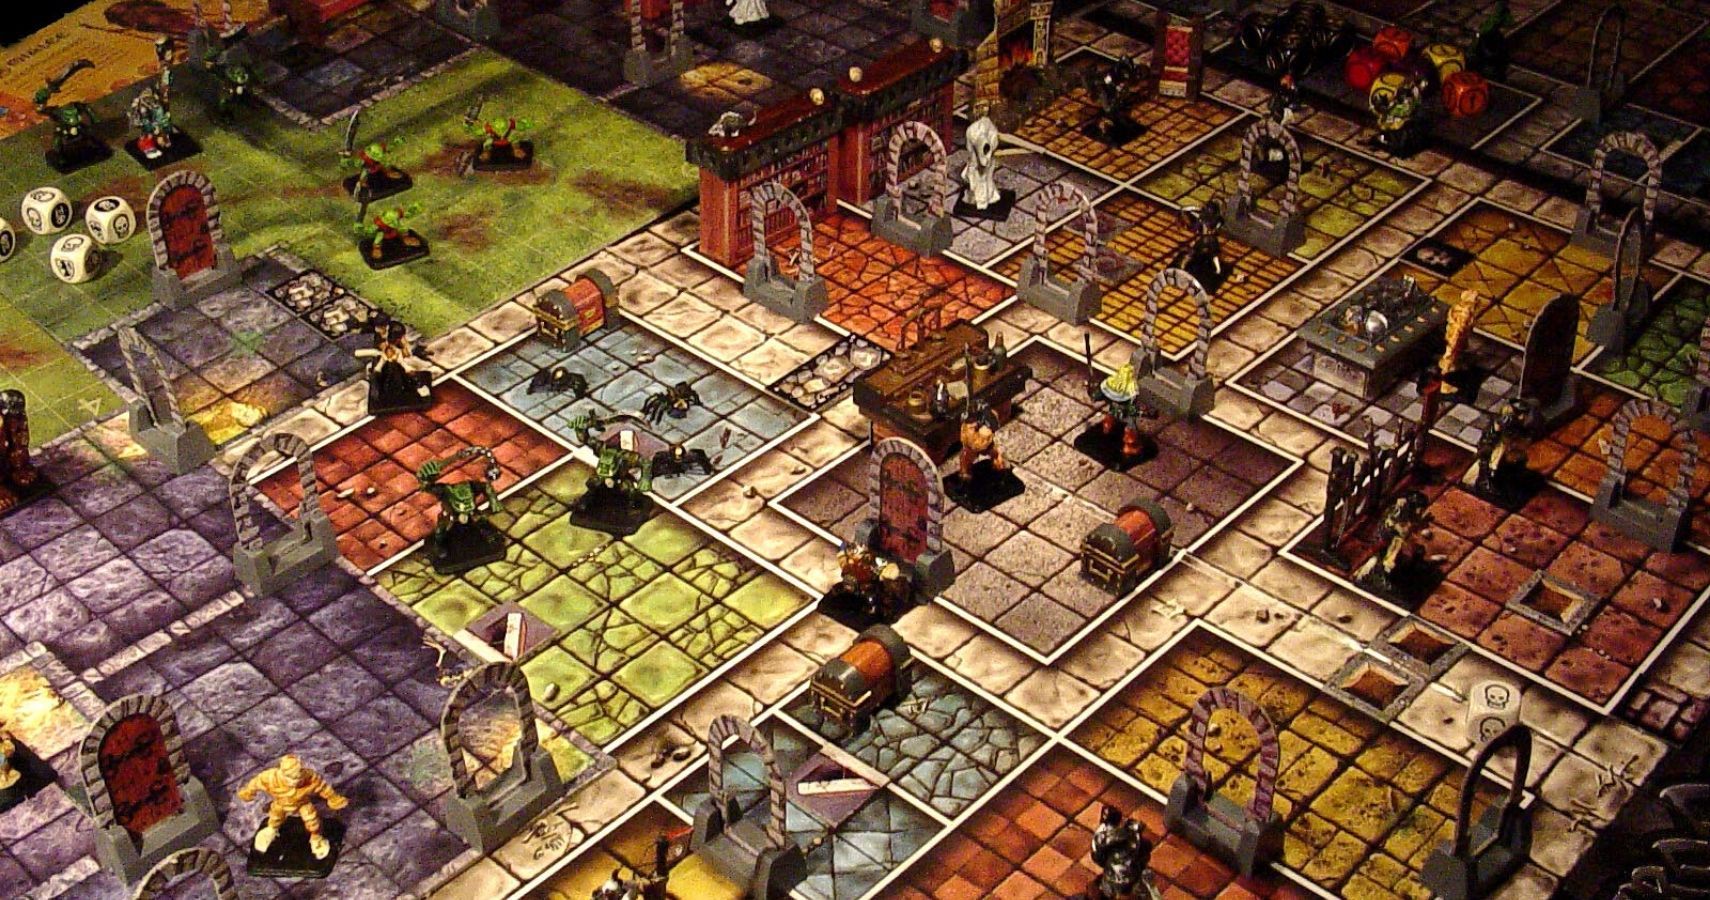 10 Tabletop Games To Play If You Like Dungeons & Dragons